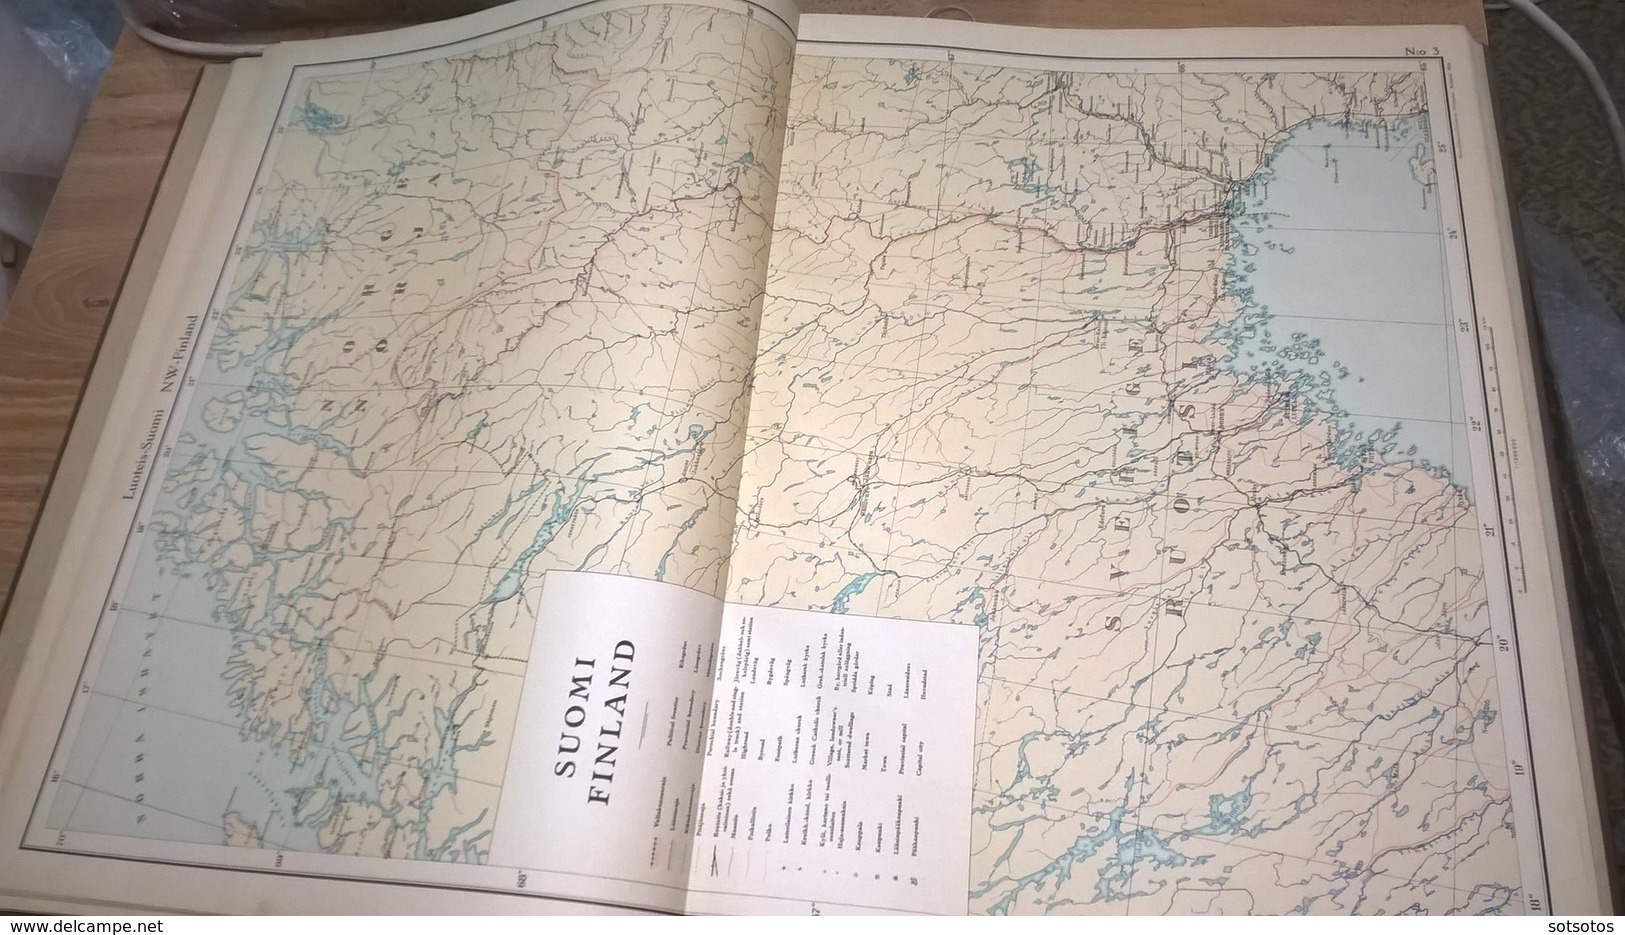 ATLAS of FINLAND - ATLAS OVER FINLAND (SUOMEN KARTASTO) 1925 - The GEOGRAPHICAL SOCIETY of FINLAND - 160PGS (8+38X4) - 3